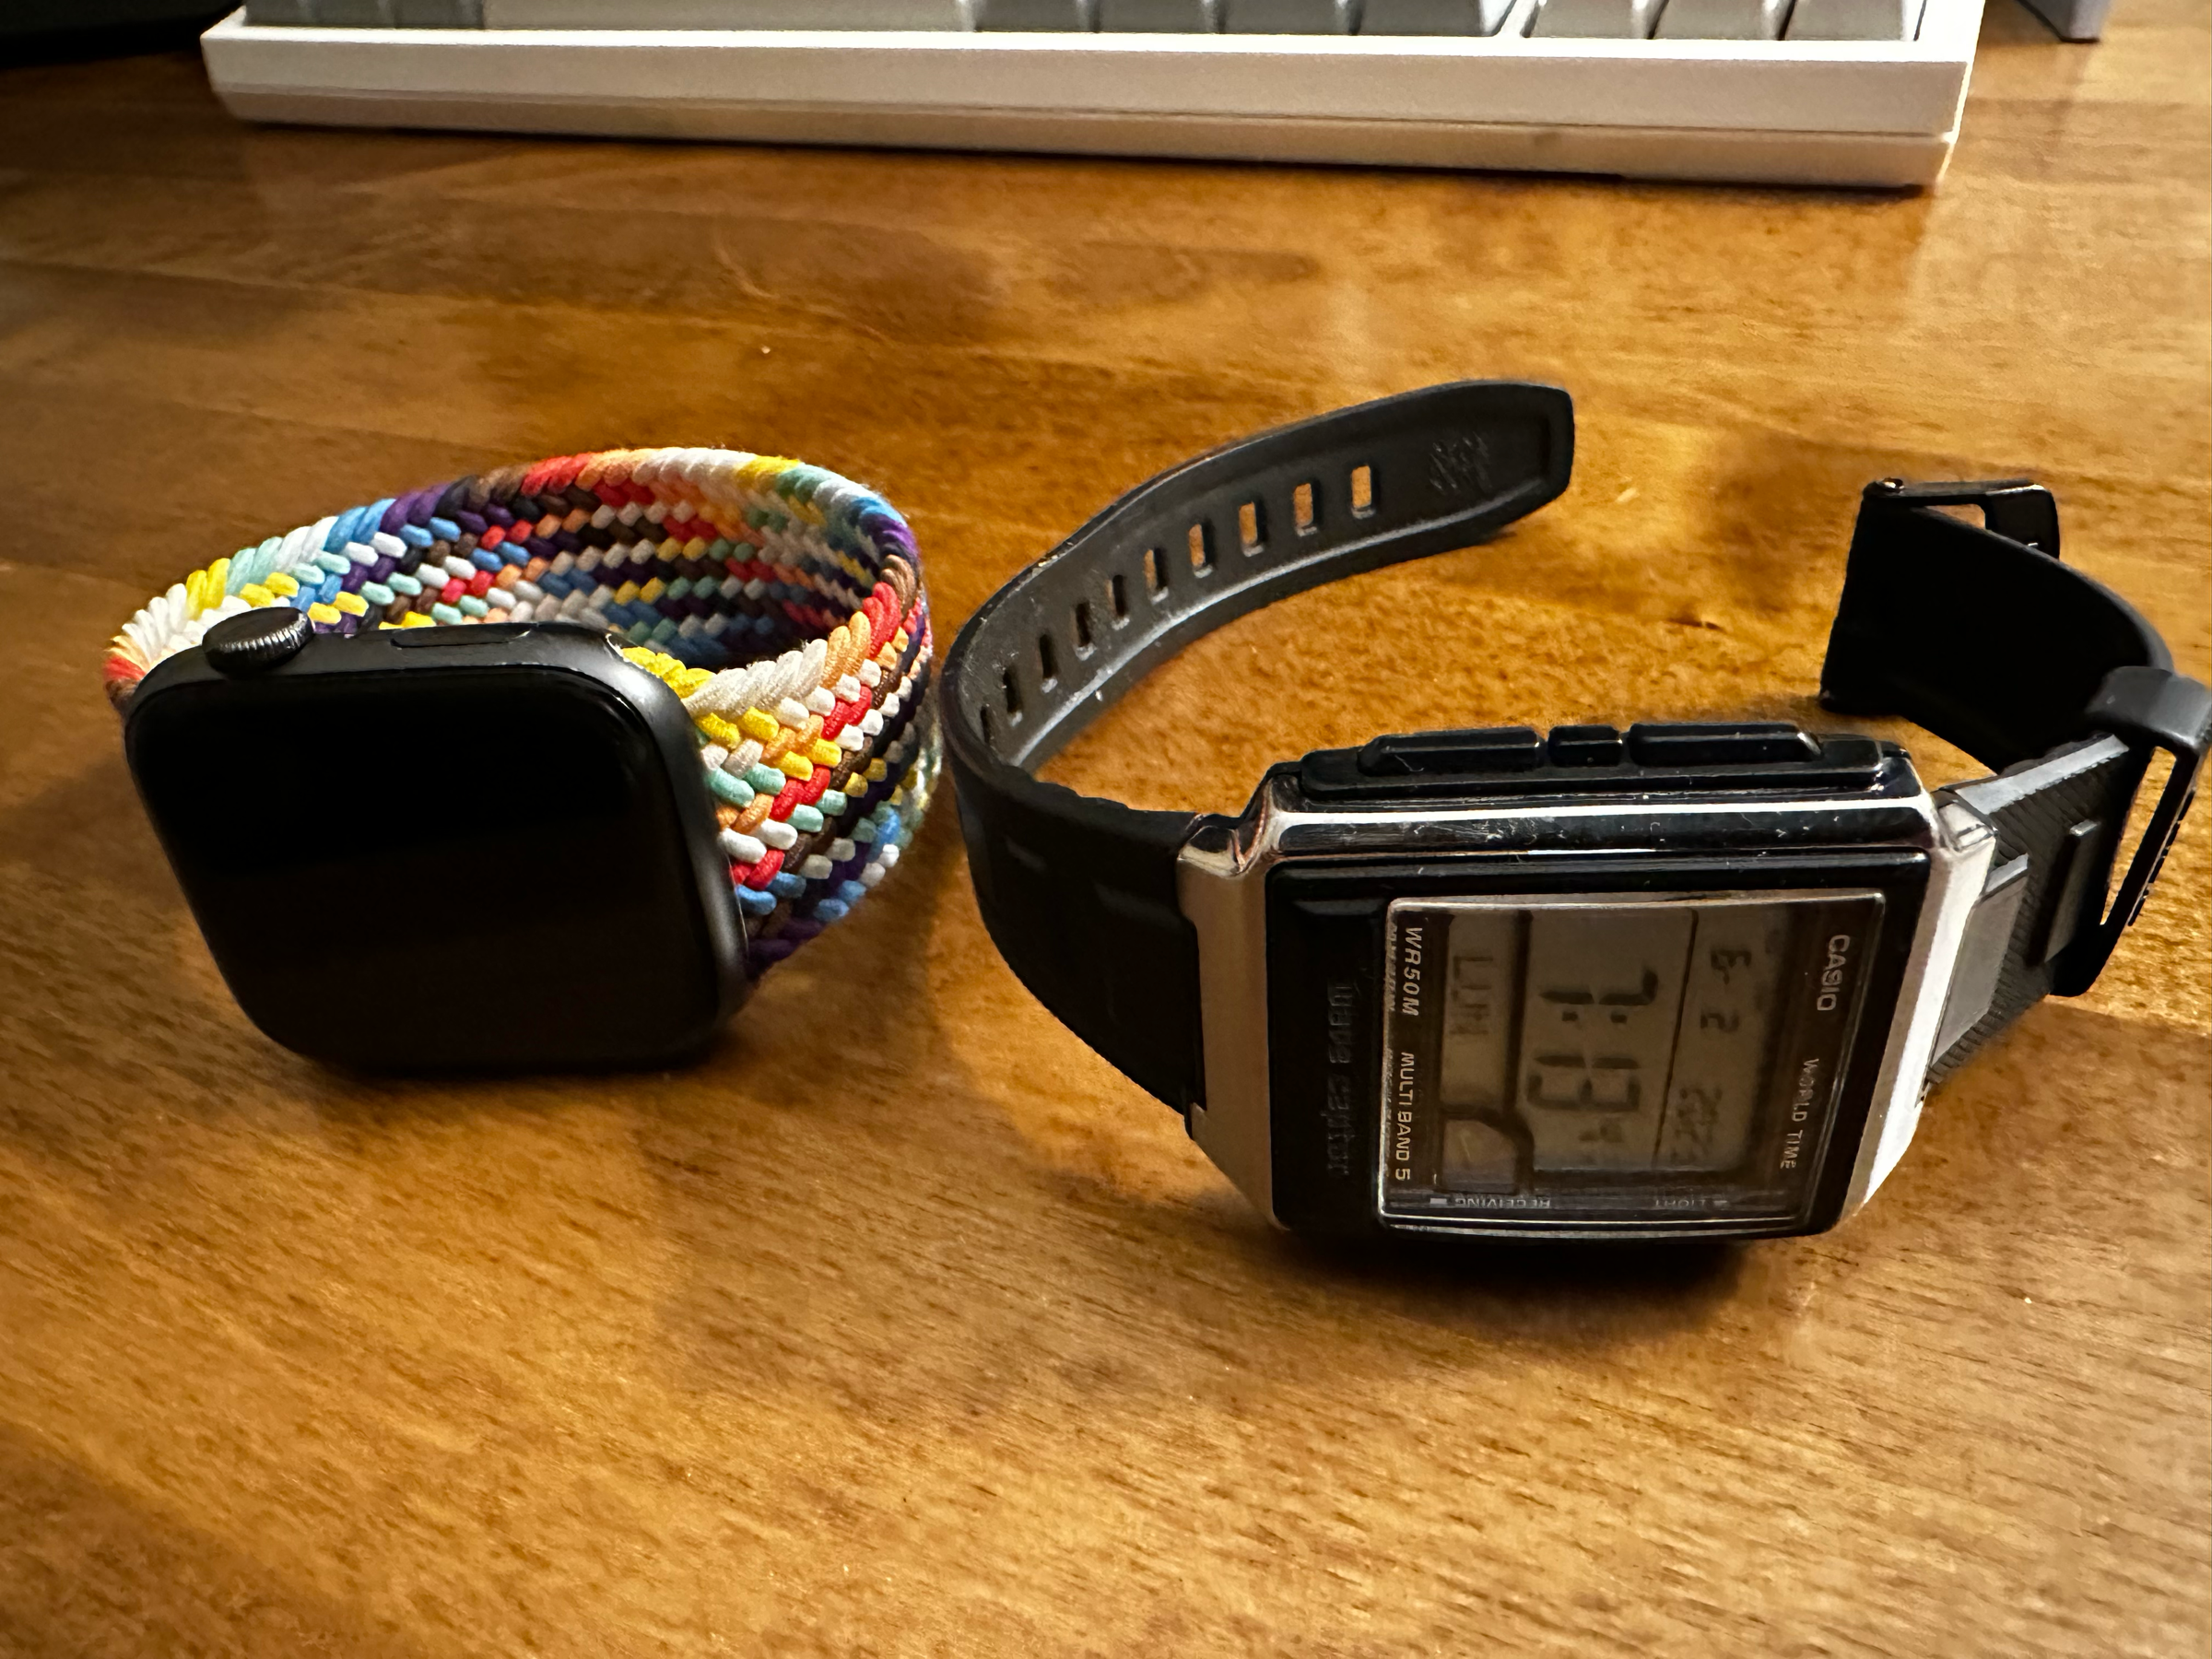 Apple and Casio watches. 